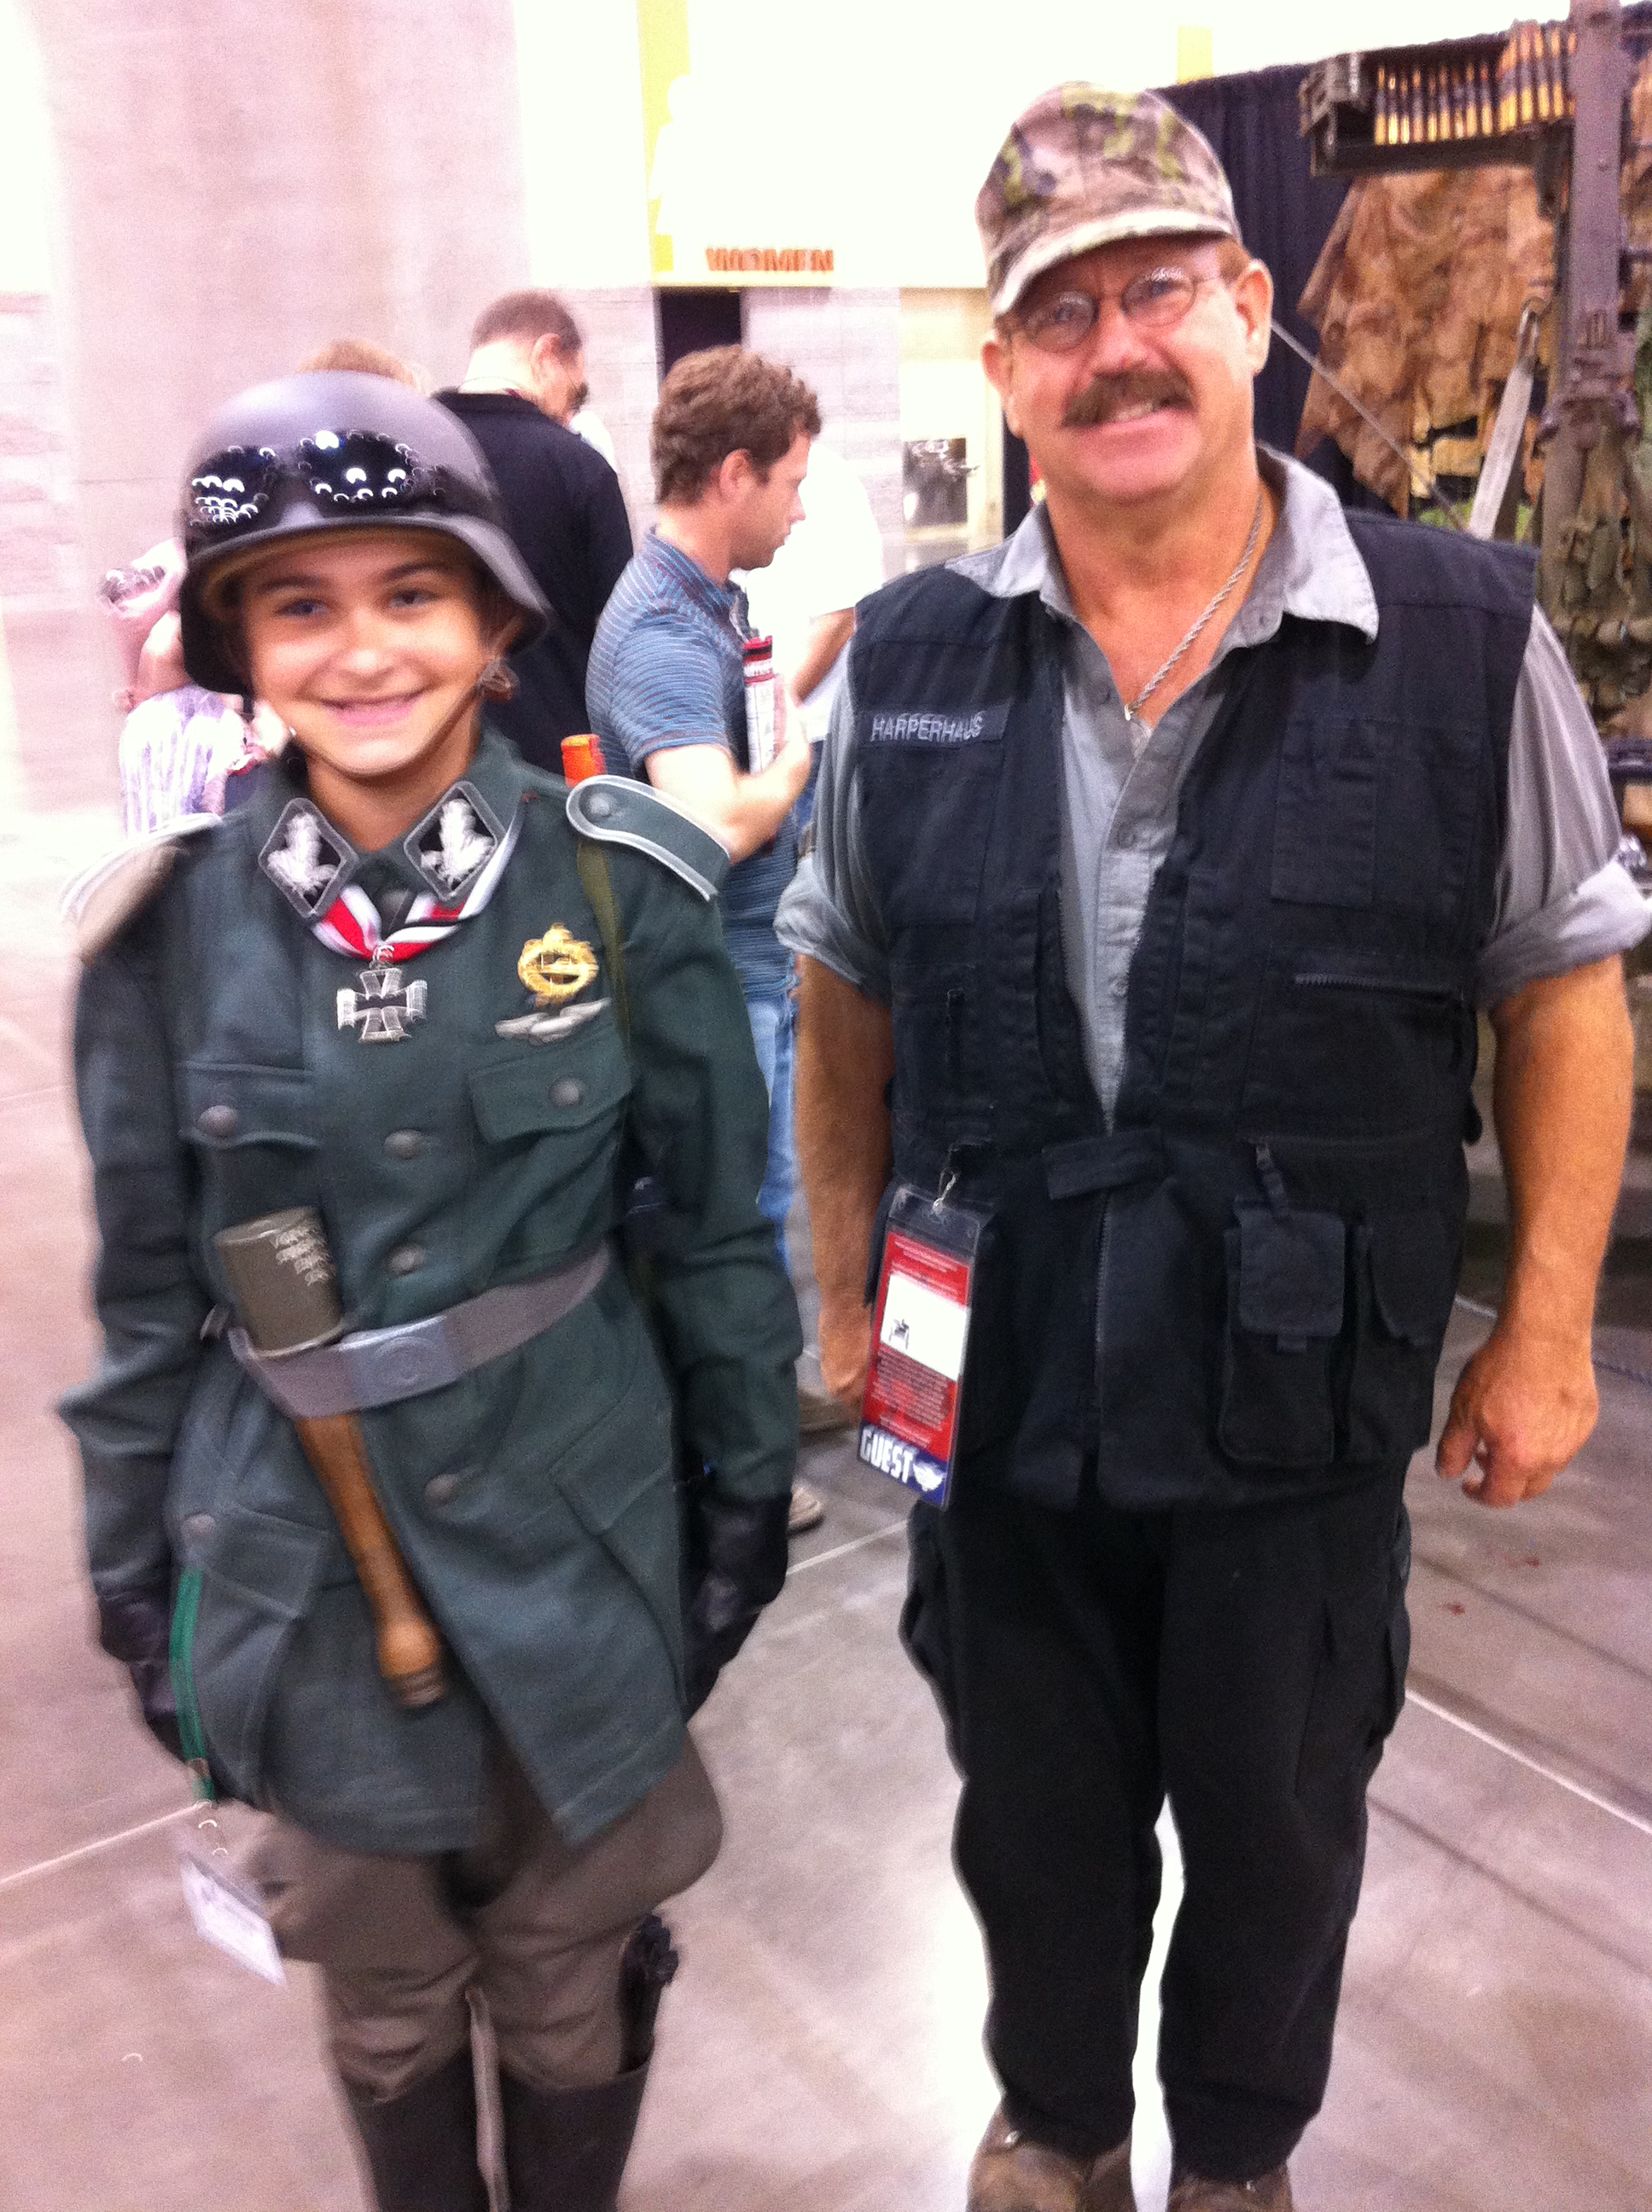 Super Fan, River, and his idol Gary Harper. River is also a fan of Valkyrie.